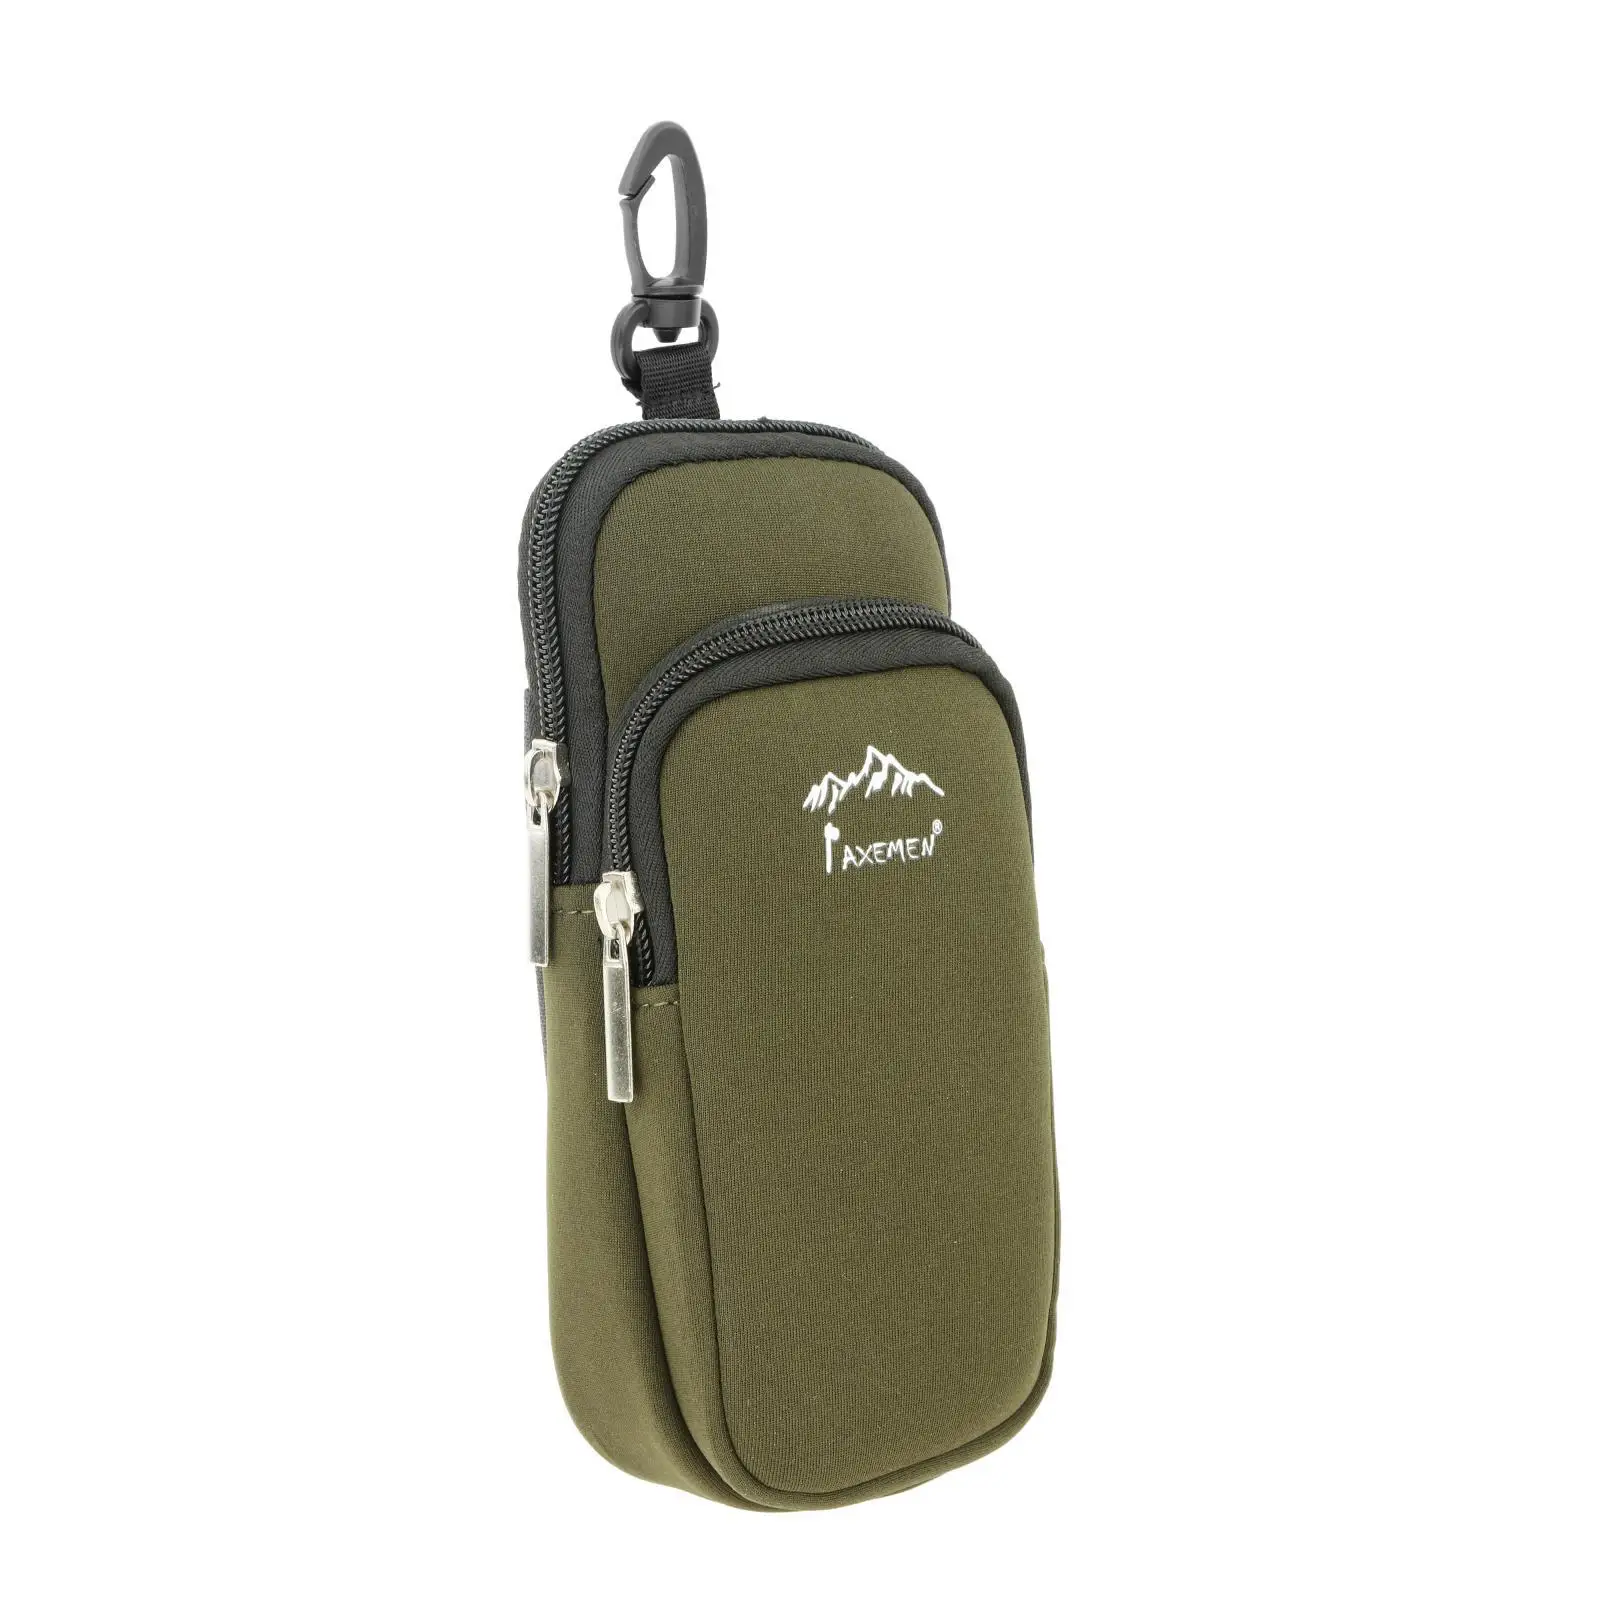 Sports Mobile Phone Pouch Purse Carrying Cover Case for Keys Running Hiking Outdoor